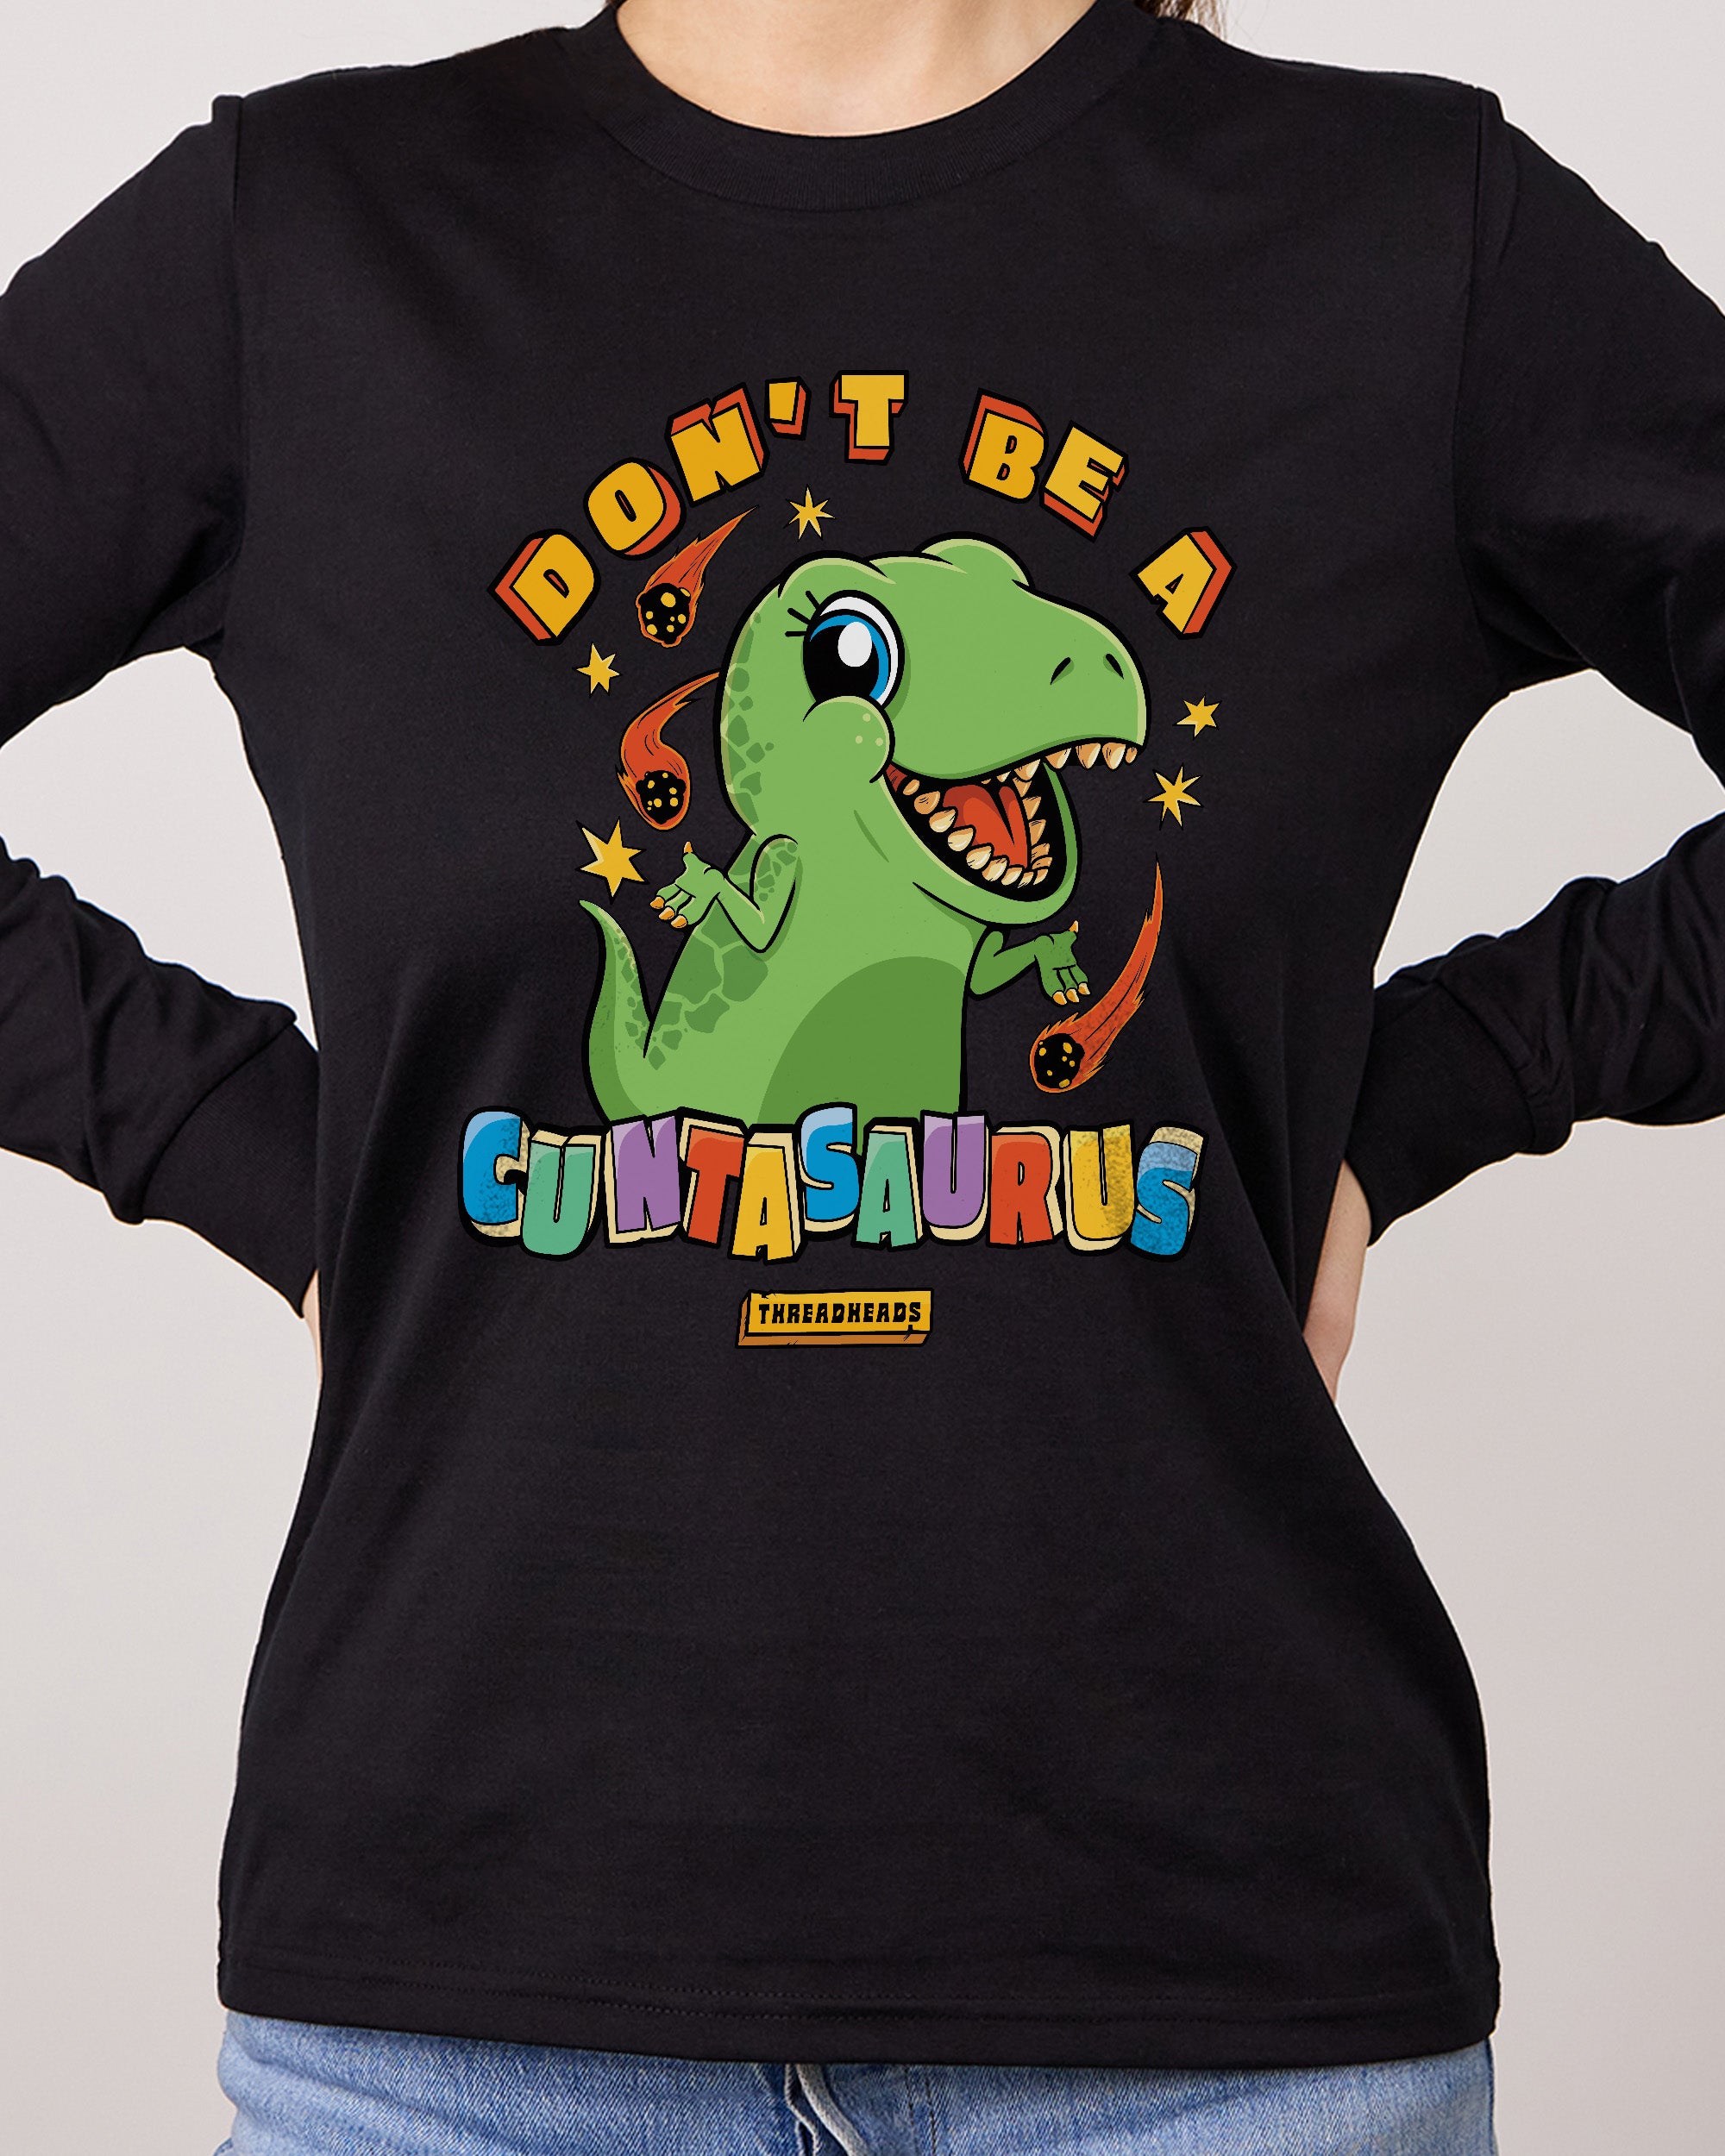 Don't Be a Cuntasaurus Long Sleeve